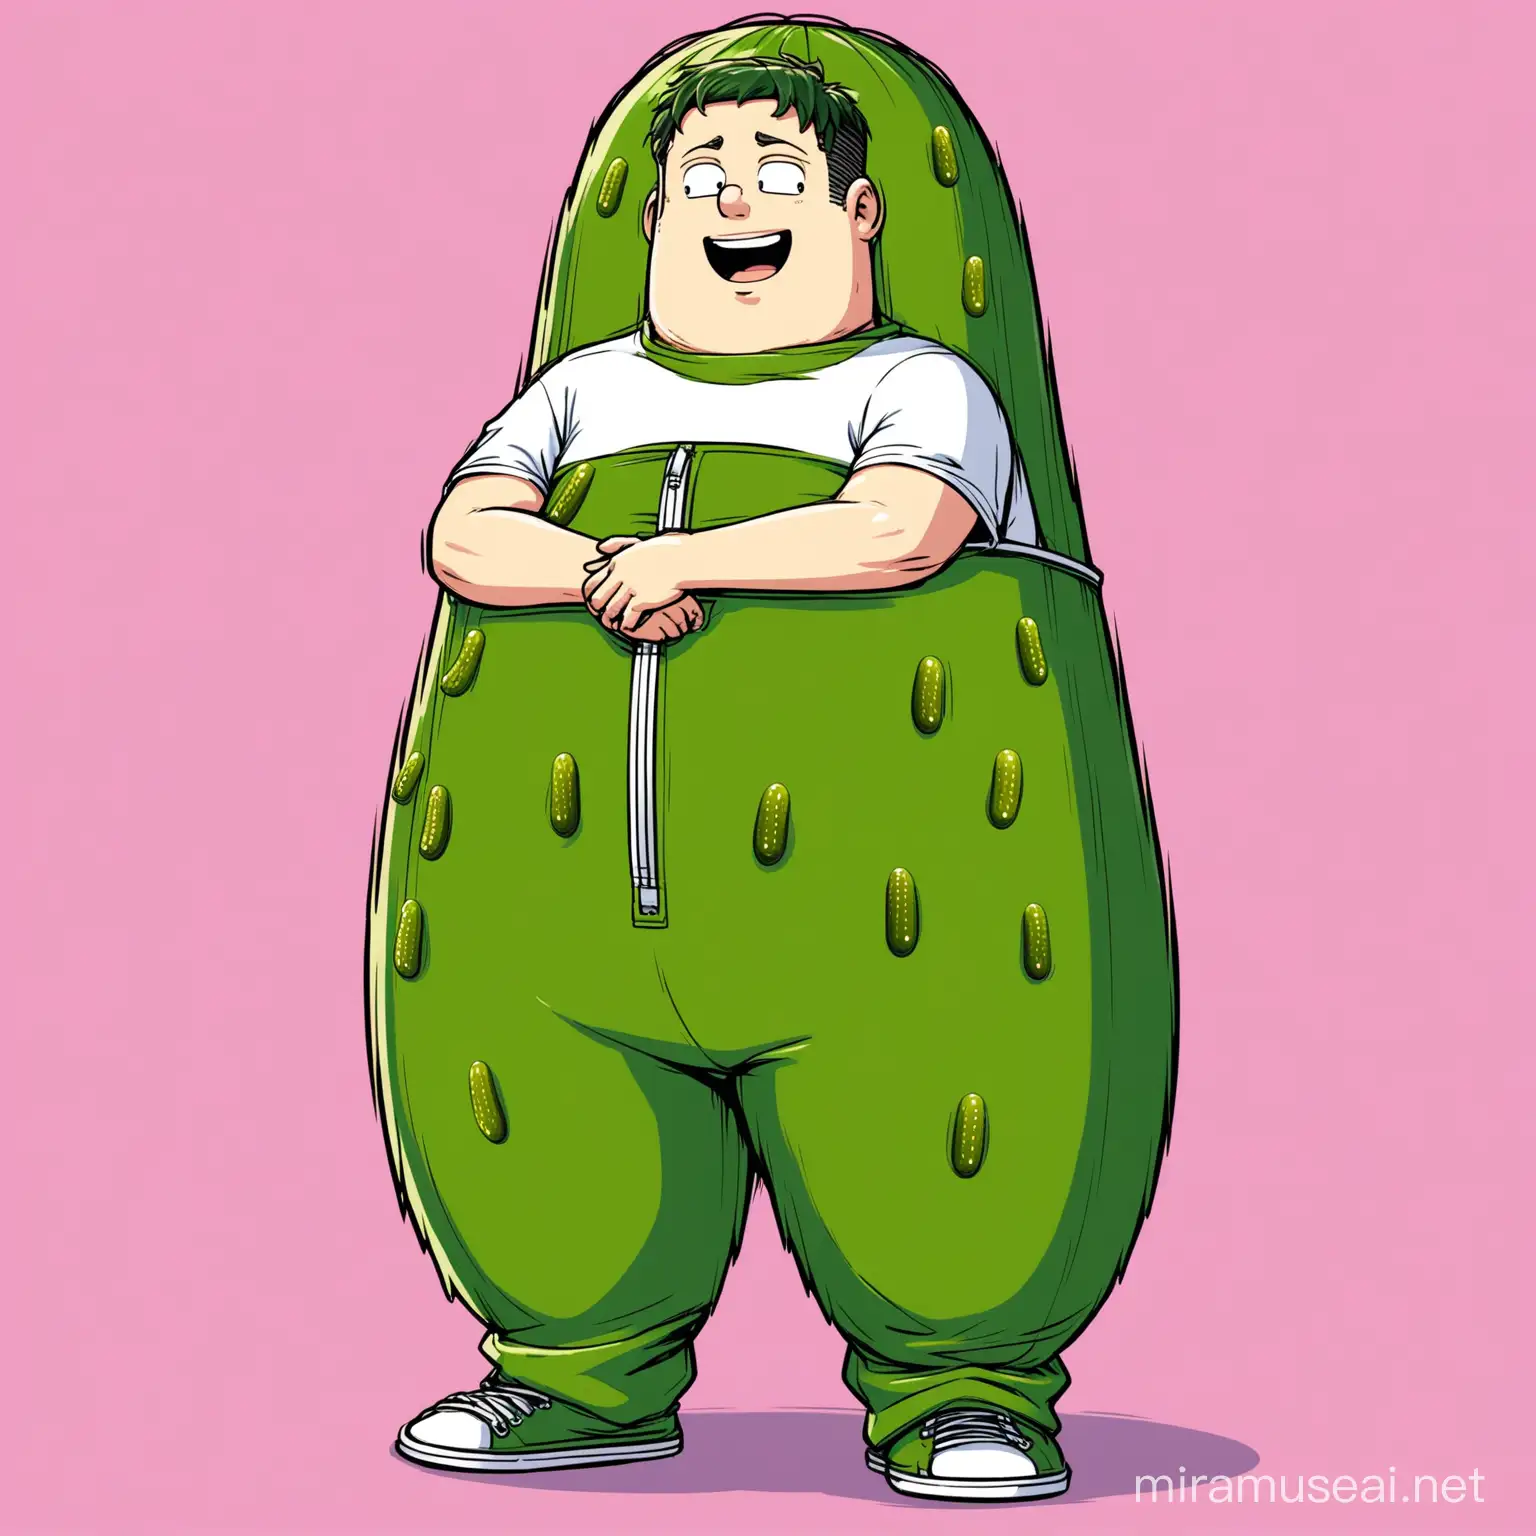 A human-sized pickle named Carl, he is wearing a tight t-shirt and parachute pants